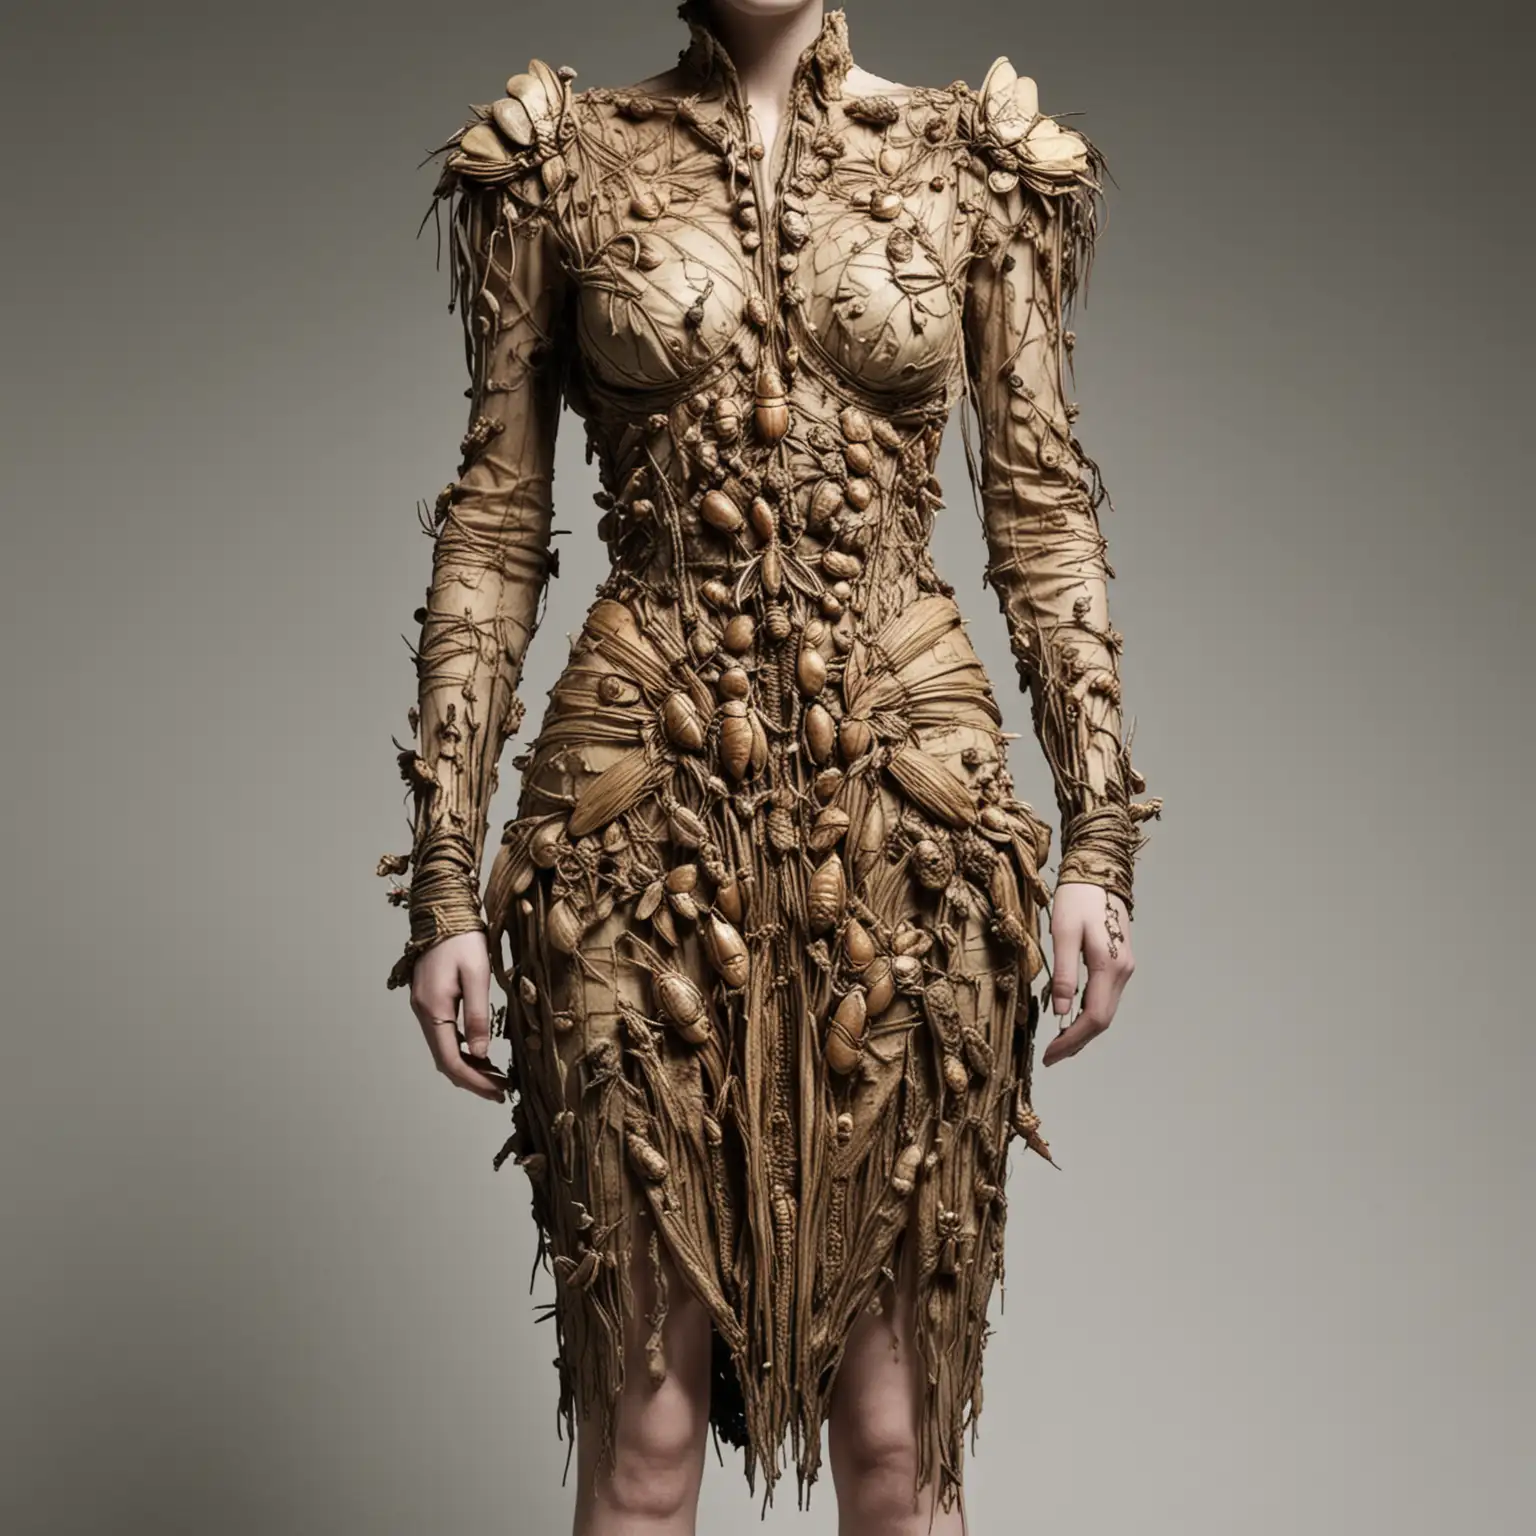 Alexander mcqueen insect inspired dress withered, decaying texture